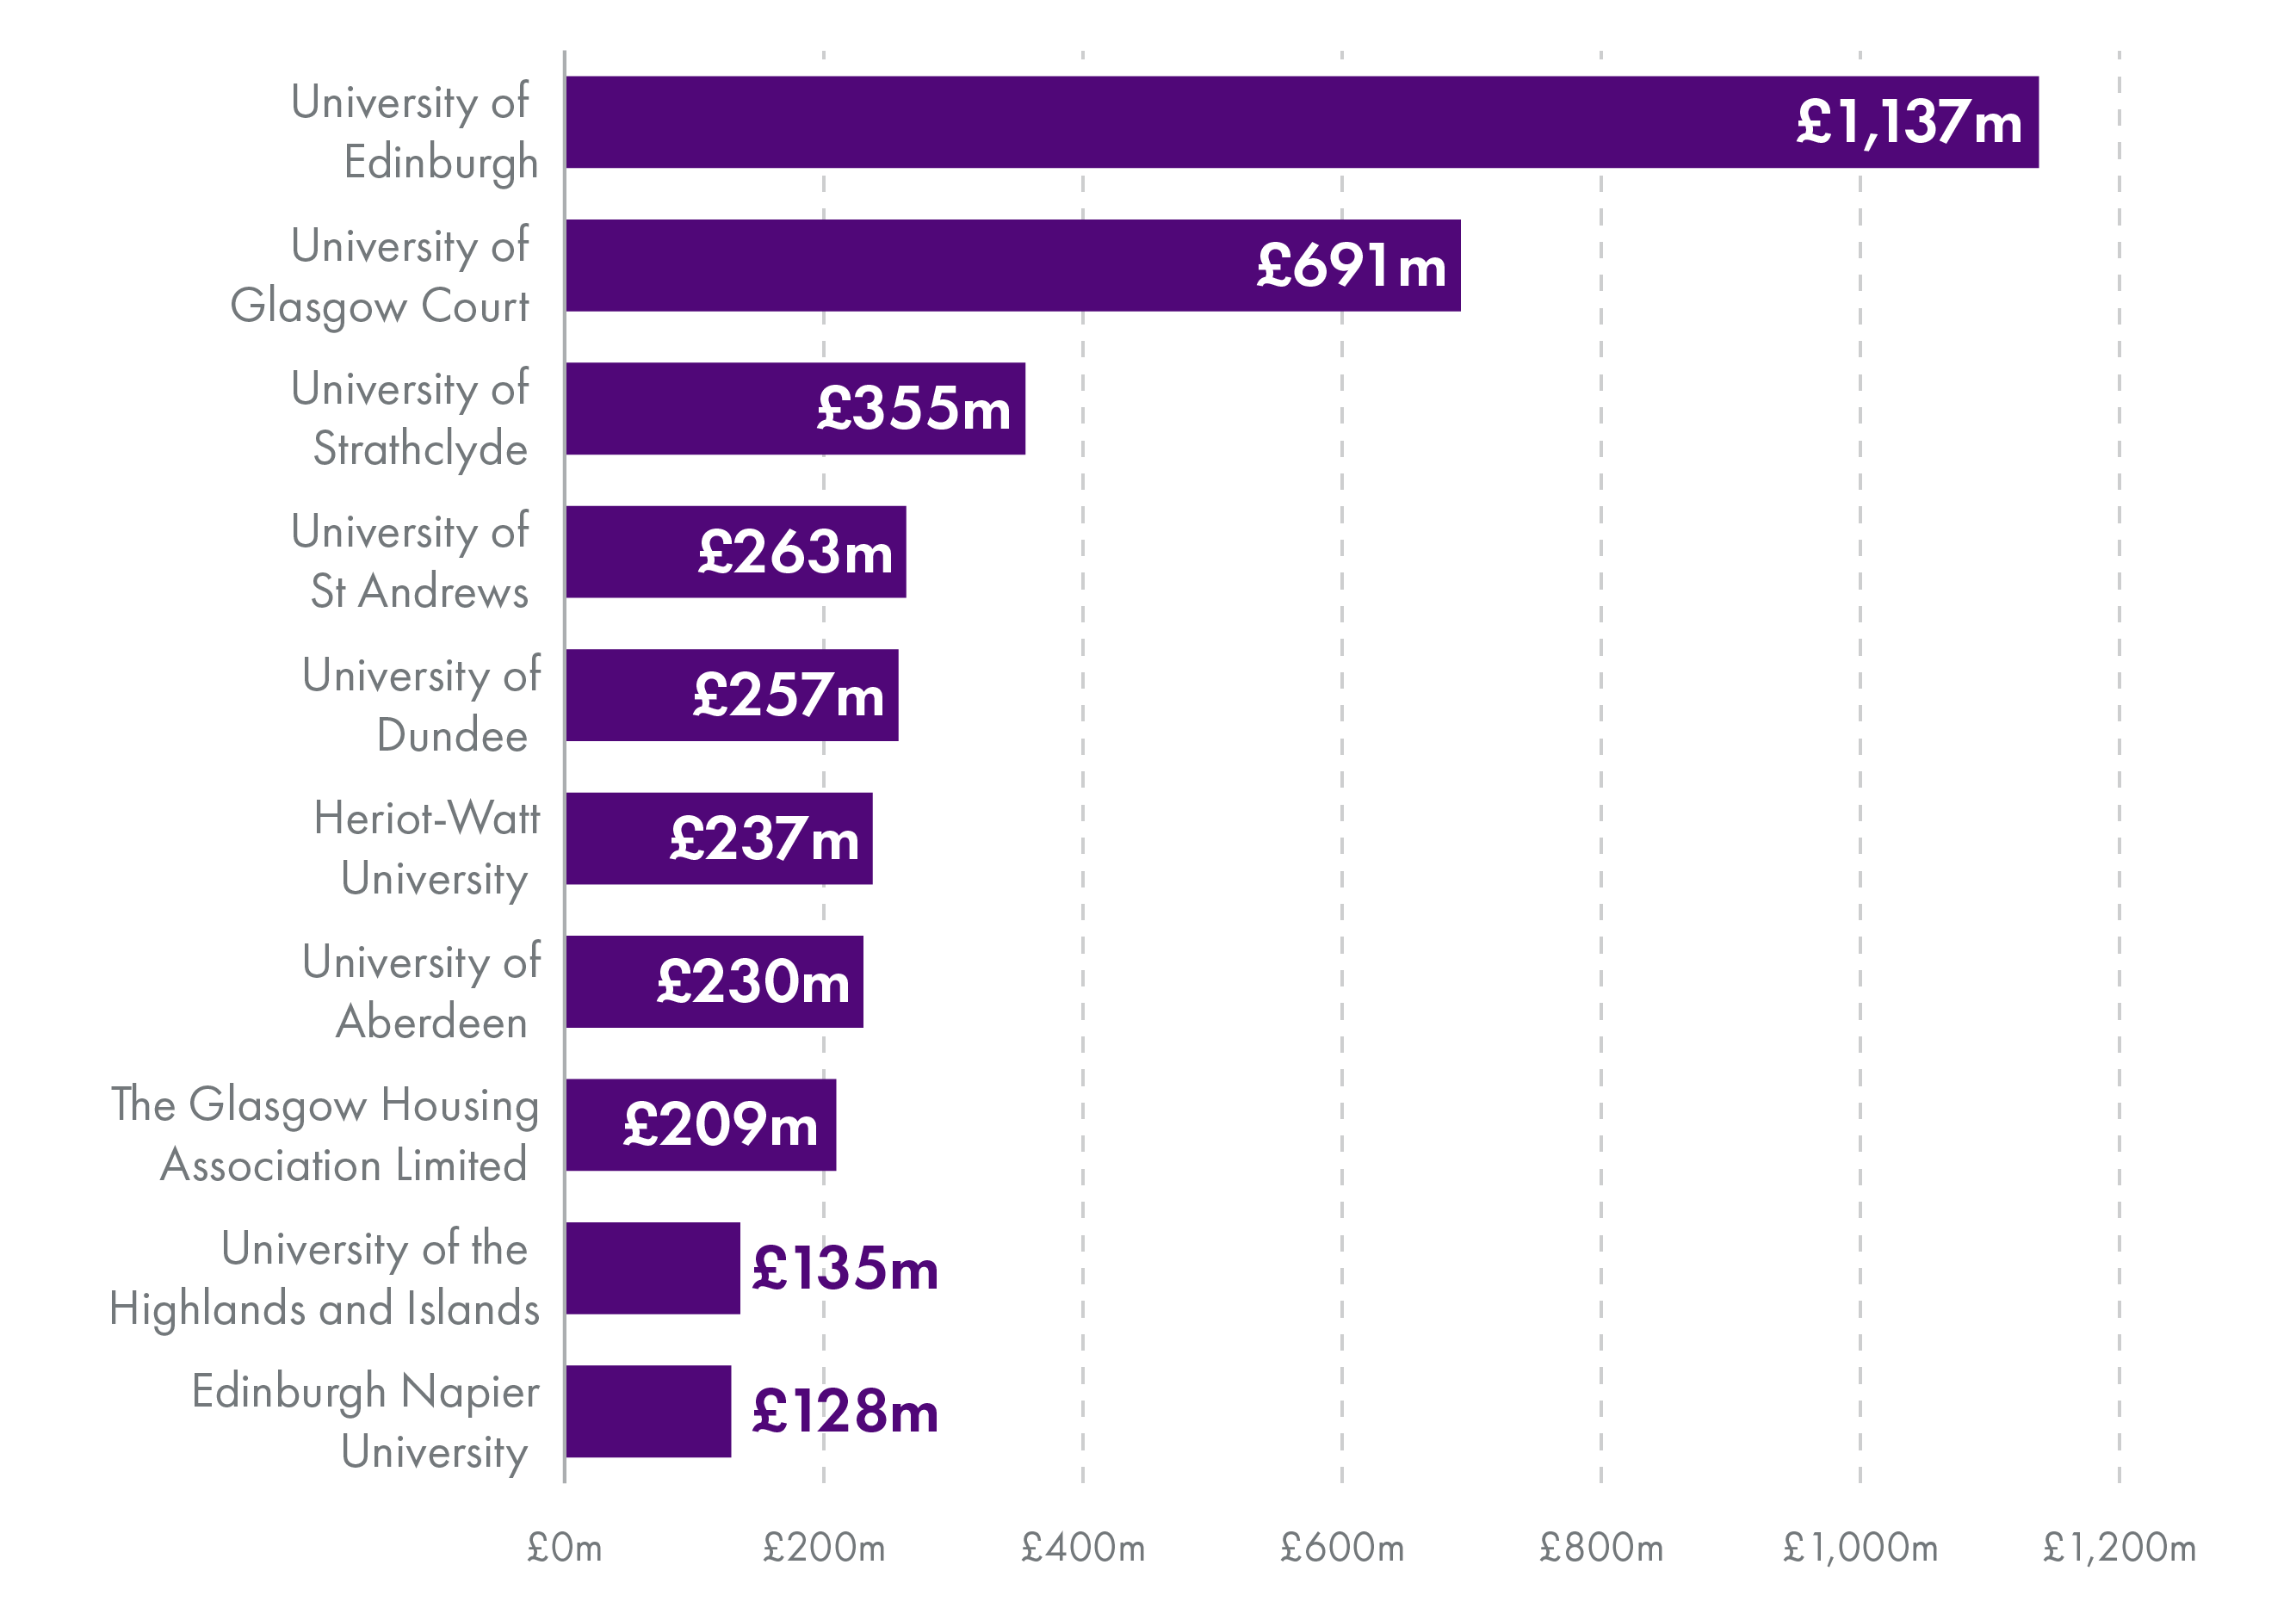 Image showing largest ten Scottish charities by annual income